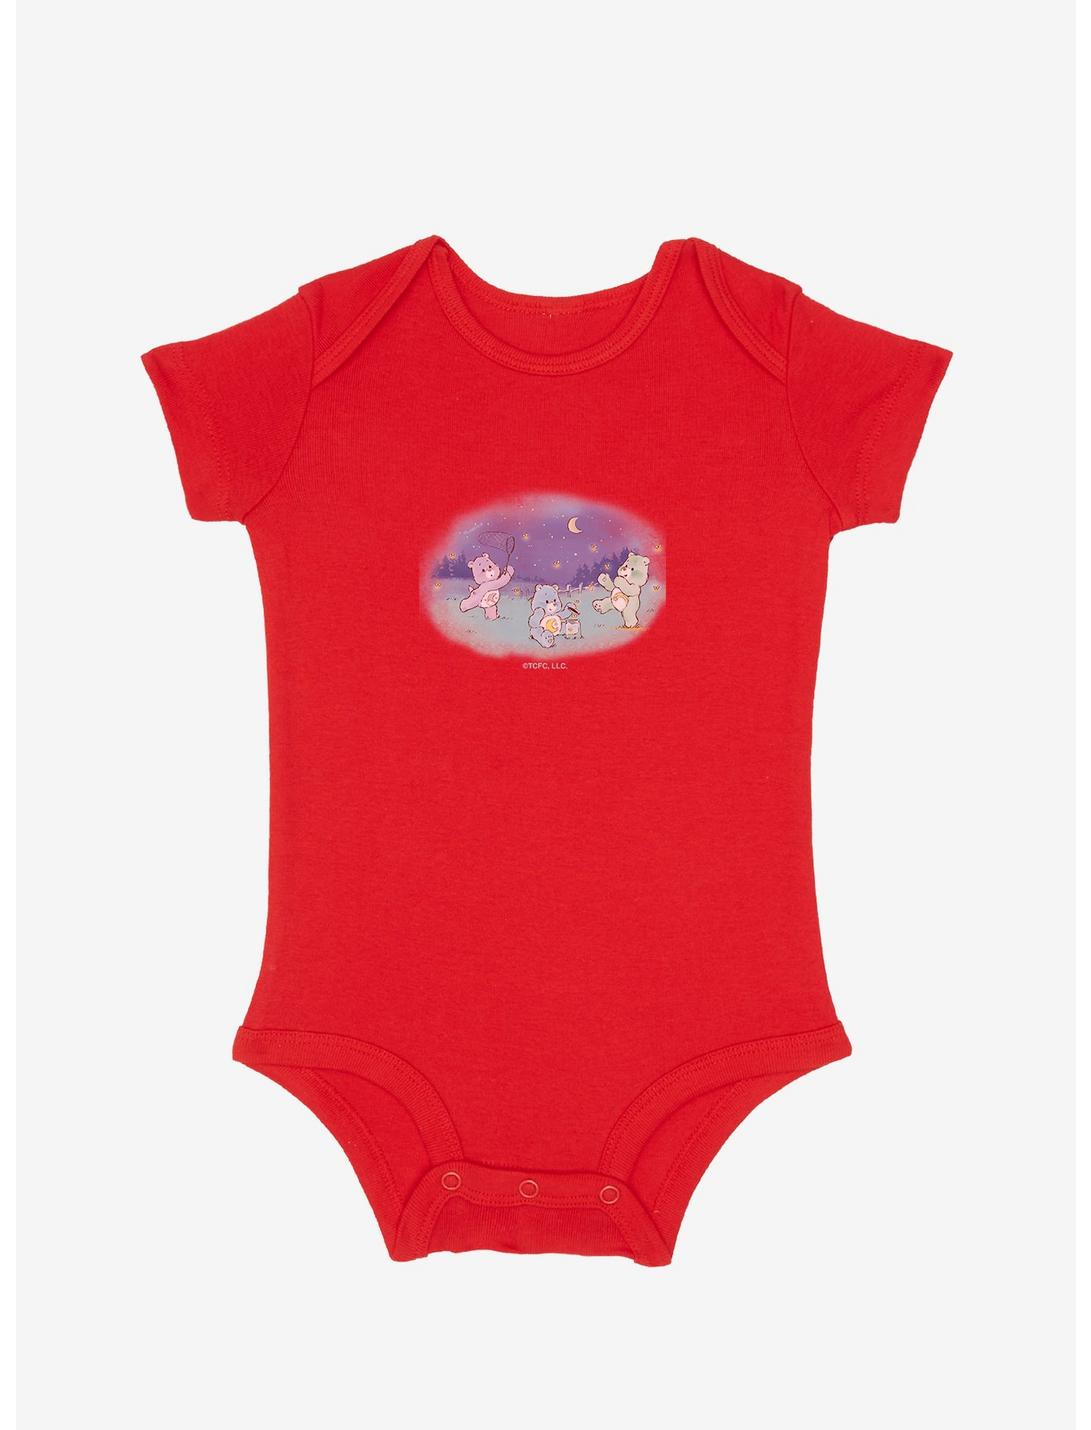 Care Bears Sweet Dreams Bedtime And Wish Catching Fireflies Infant Bodysuit, , hi-res